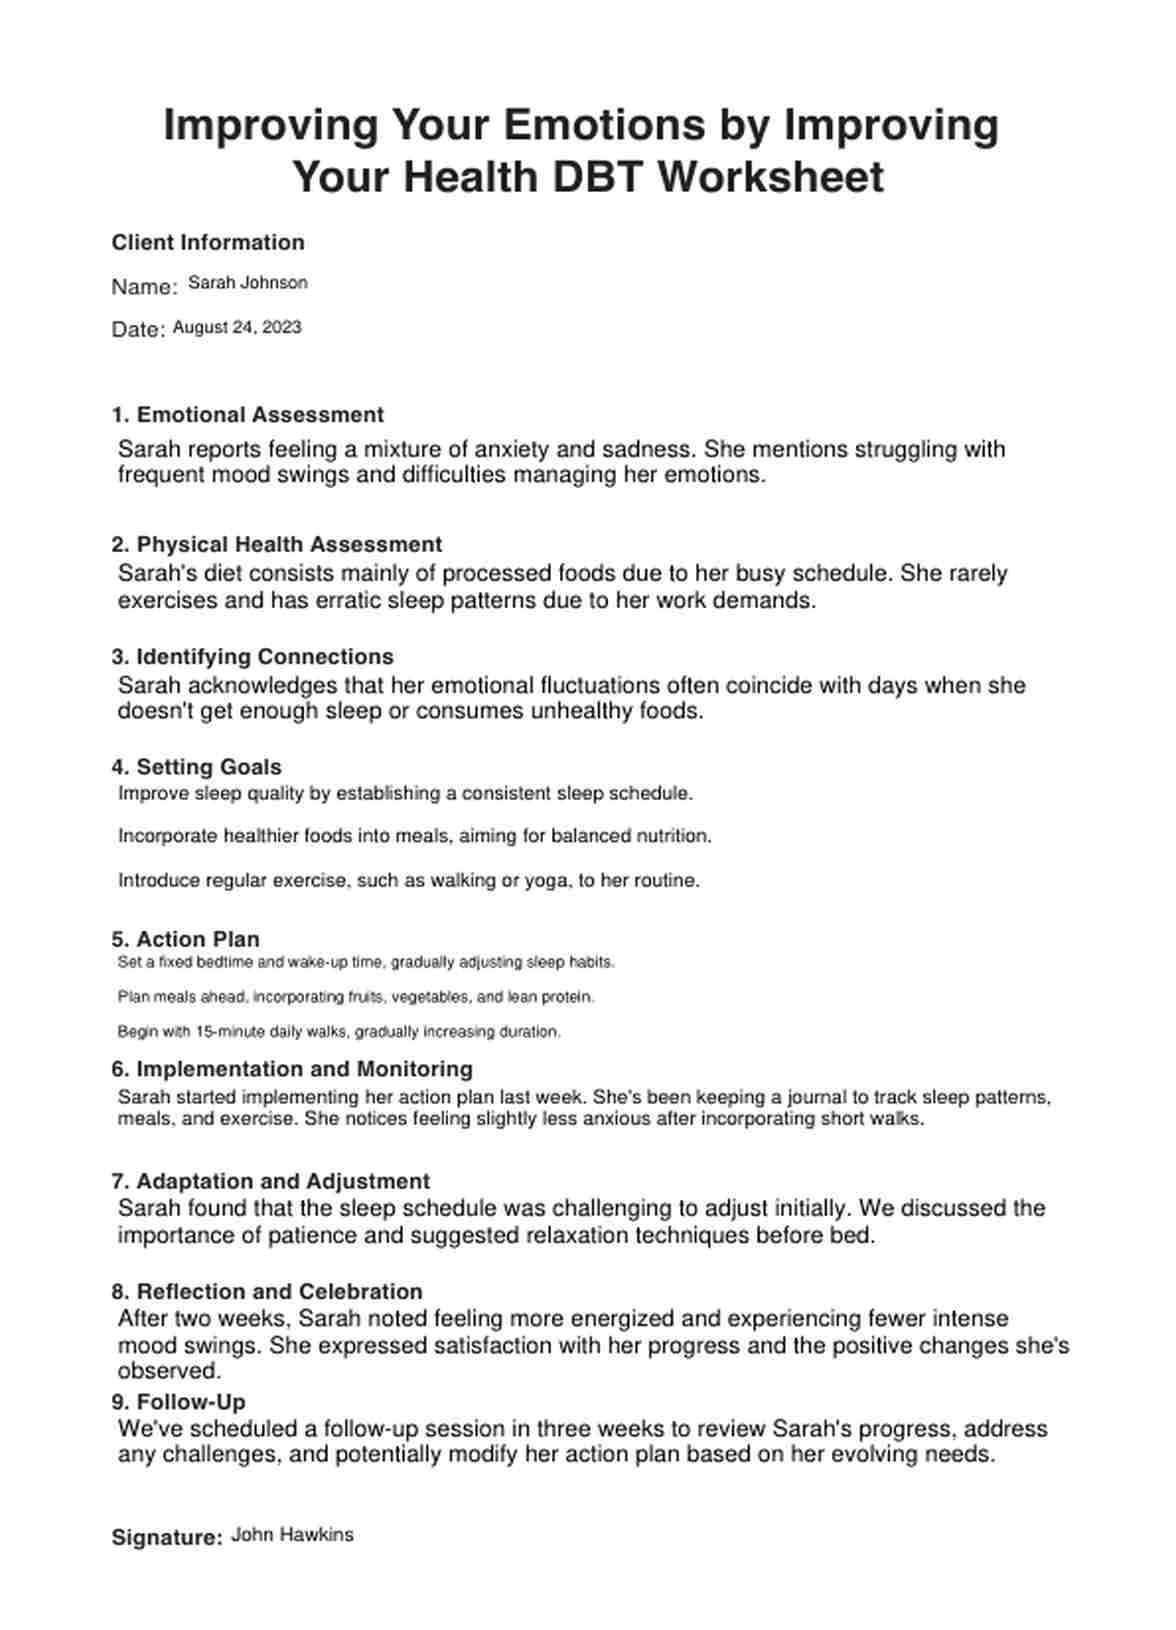 Improving Your Emotions by Improving Your Health DBT Worksheet PDF Example